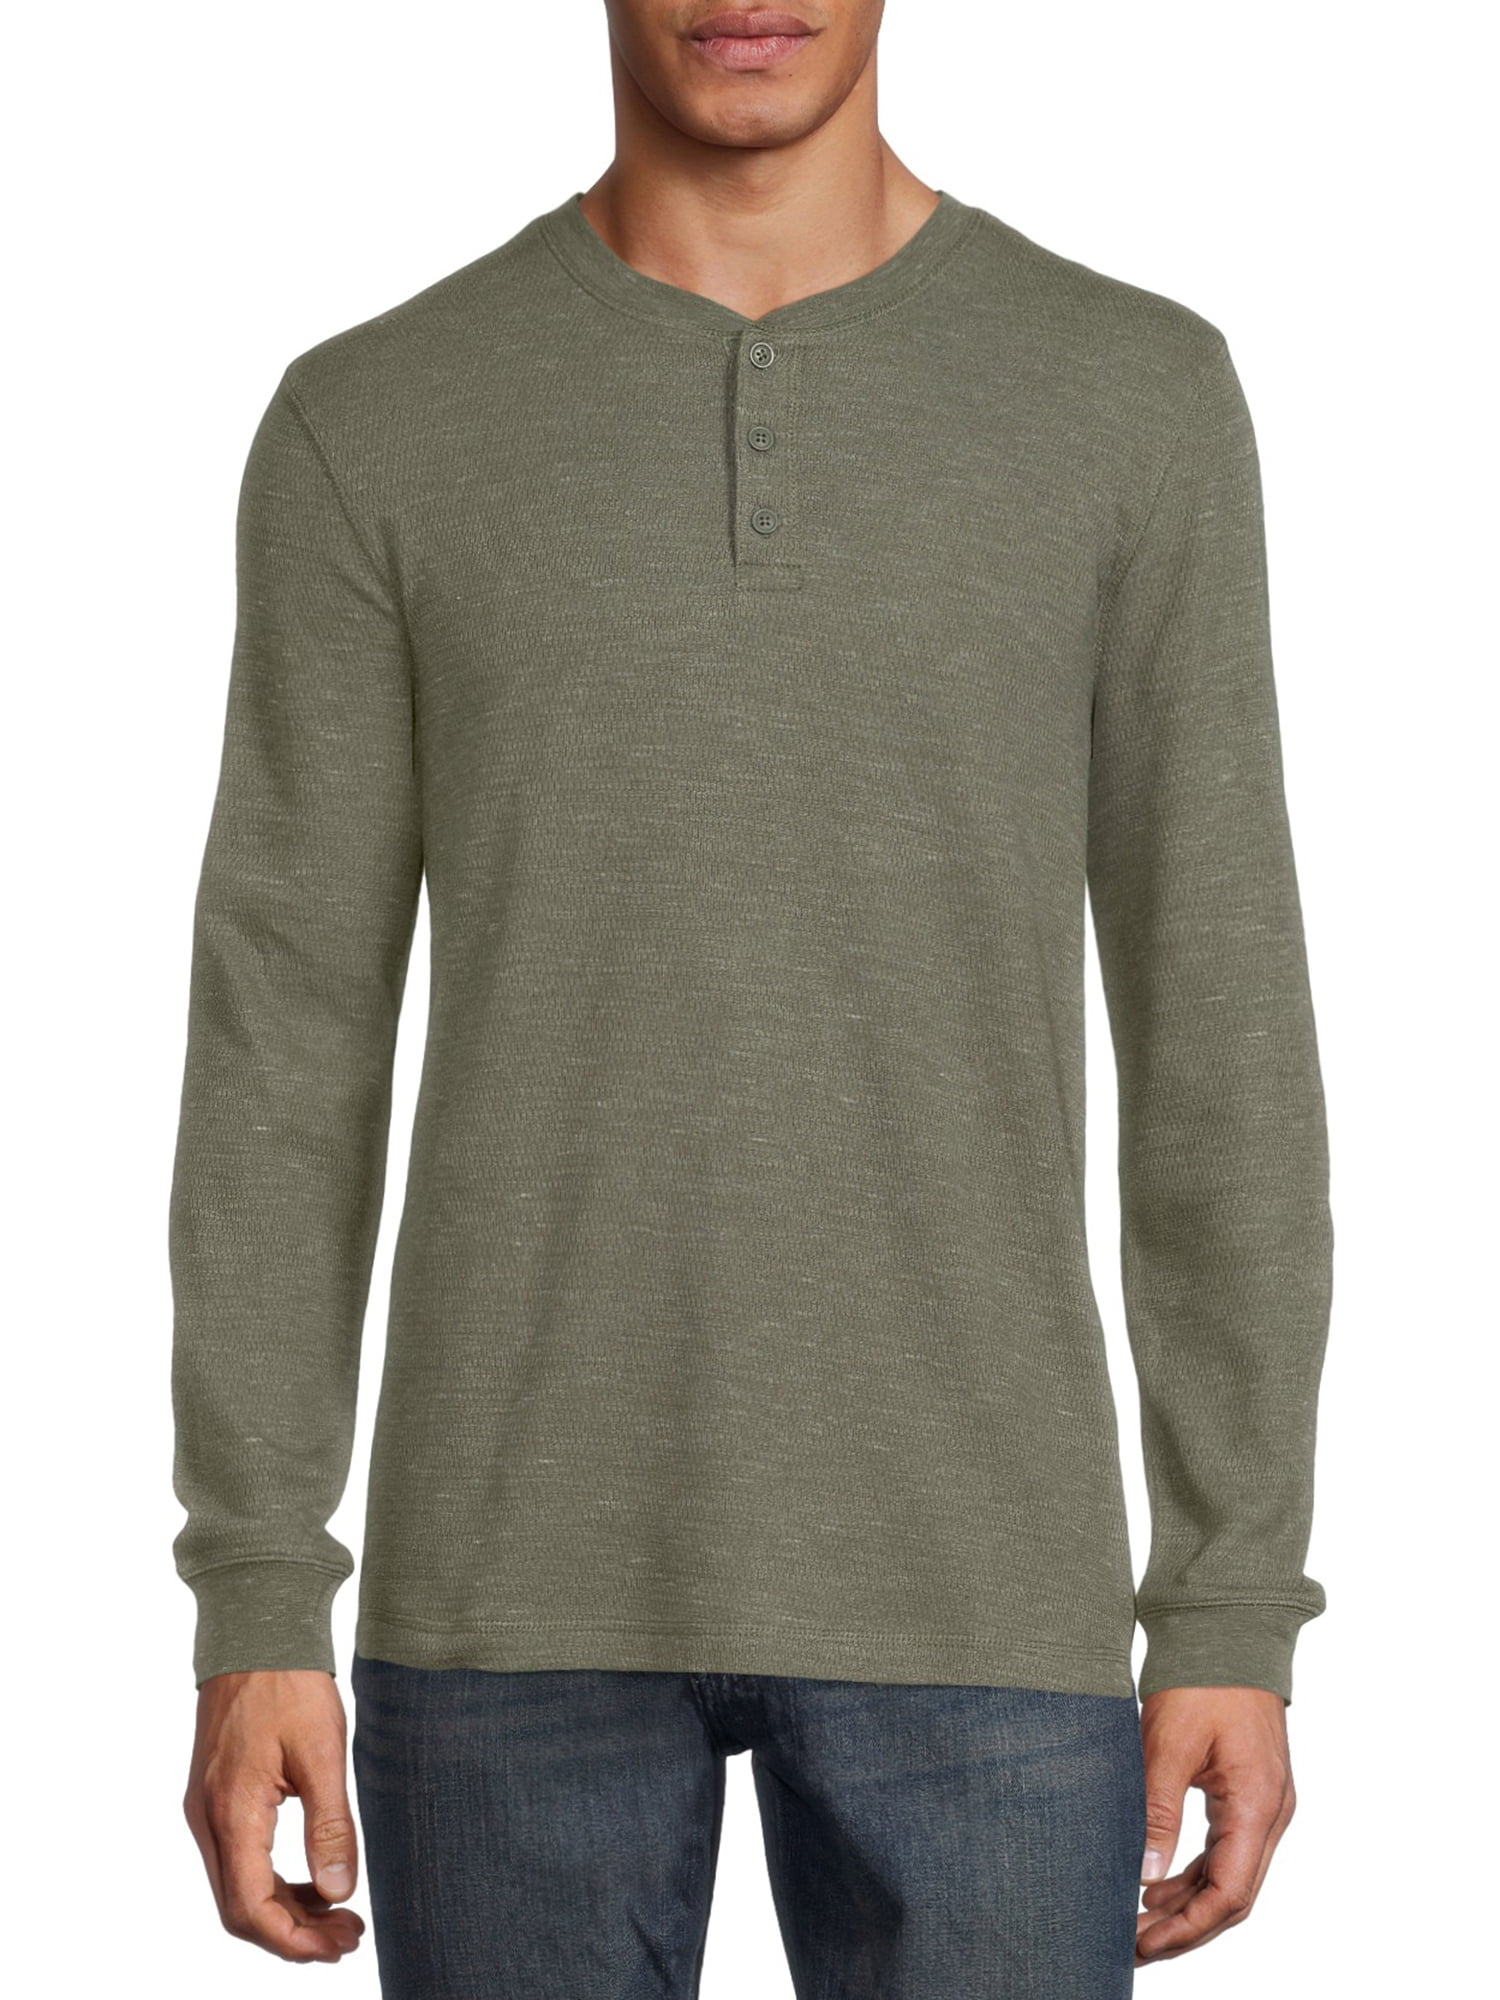 George Men's and Big Men's Long Sleeve Thermal Henley Shirt